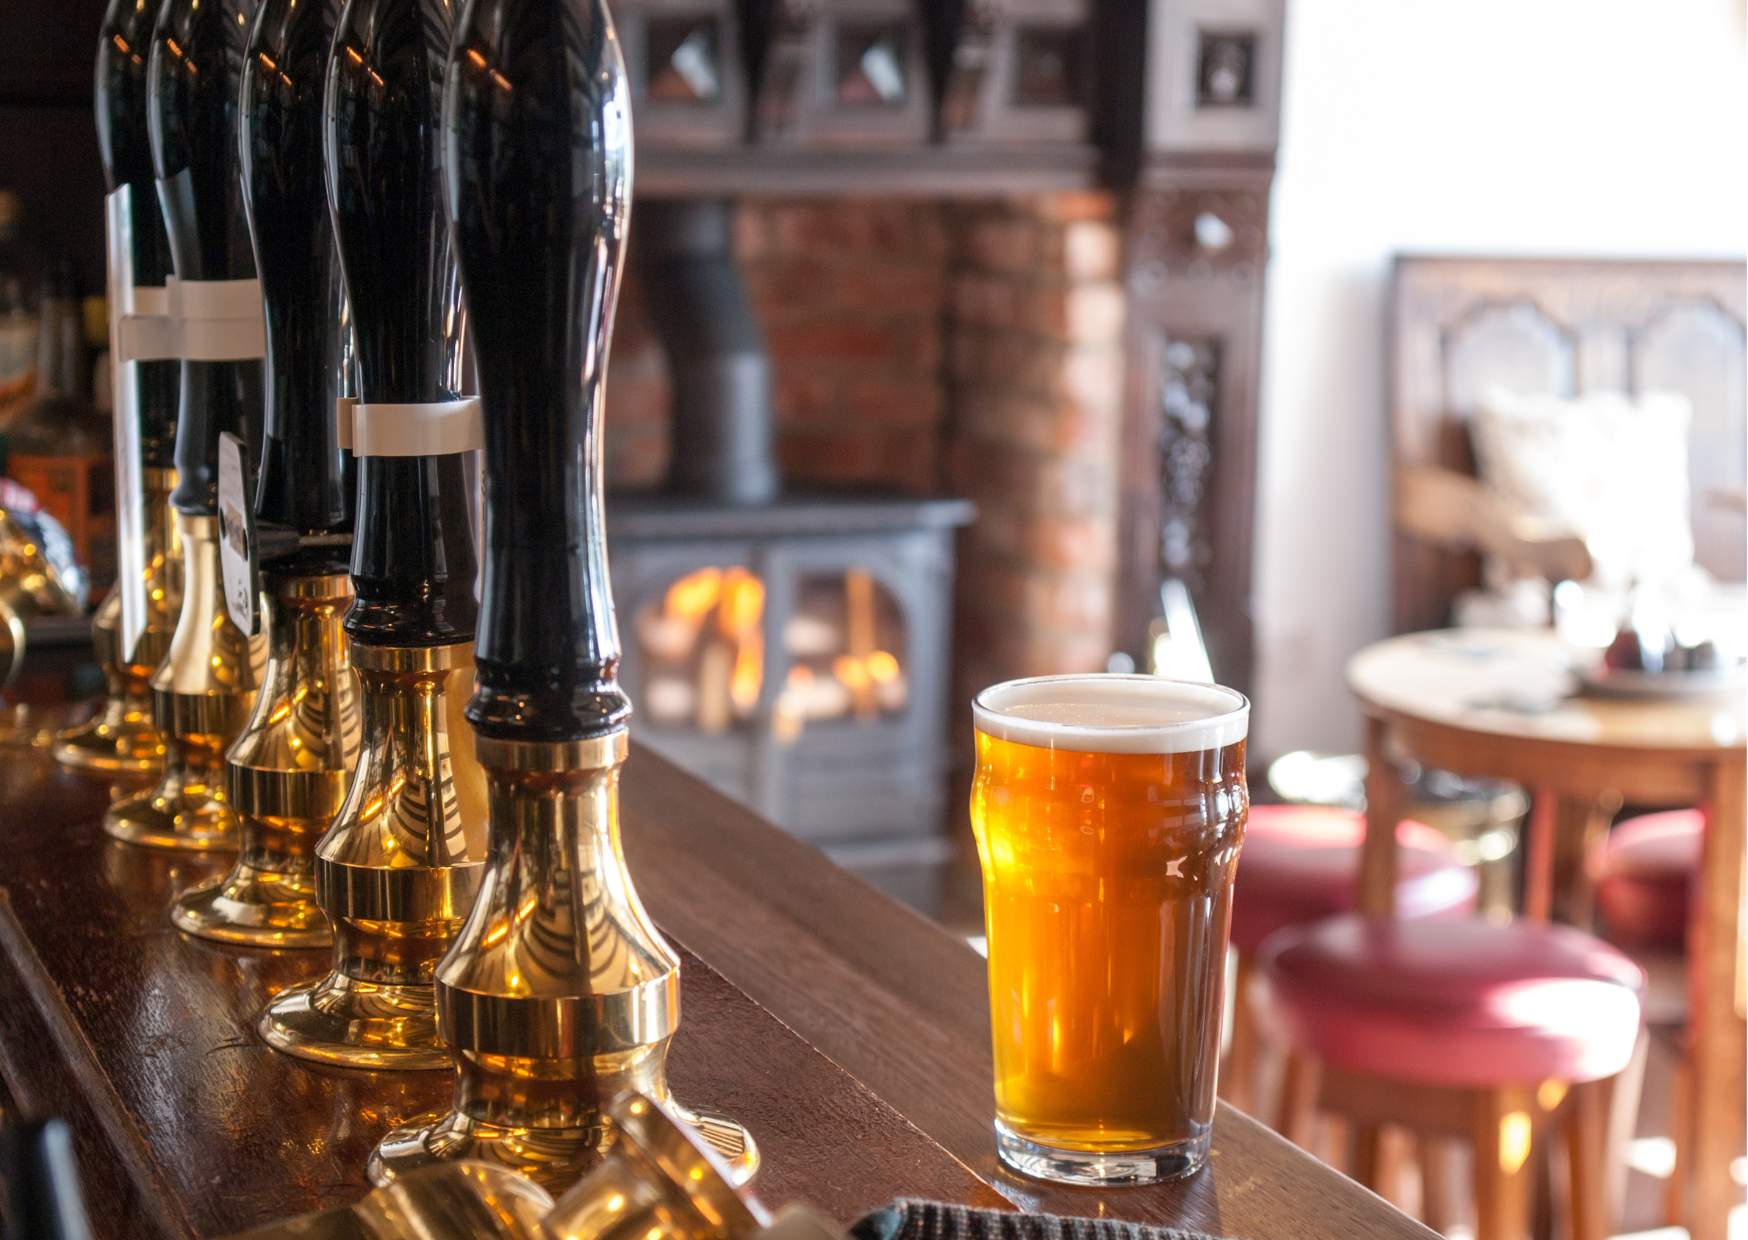 A pint of beer on a bar in a cosy pub